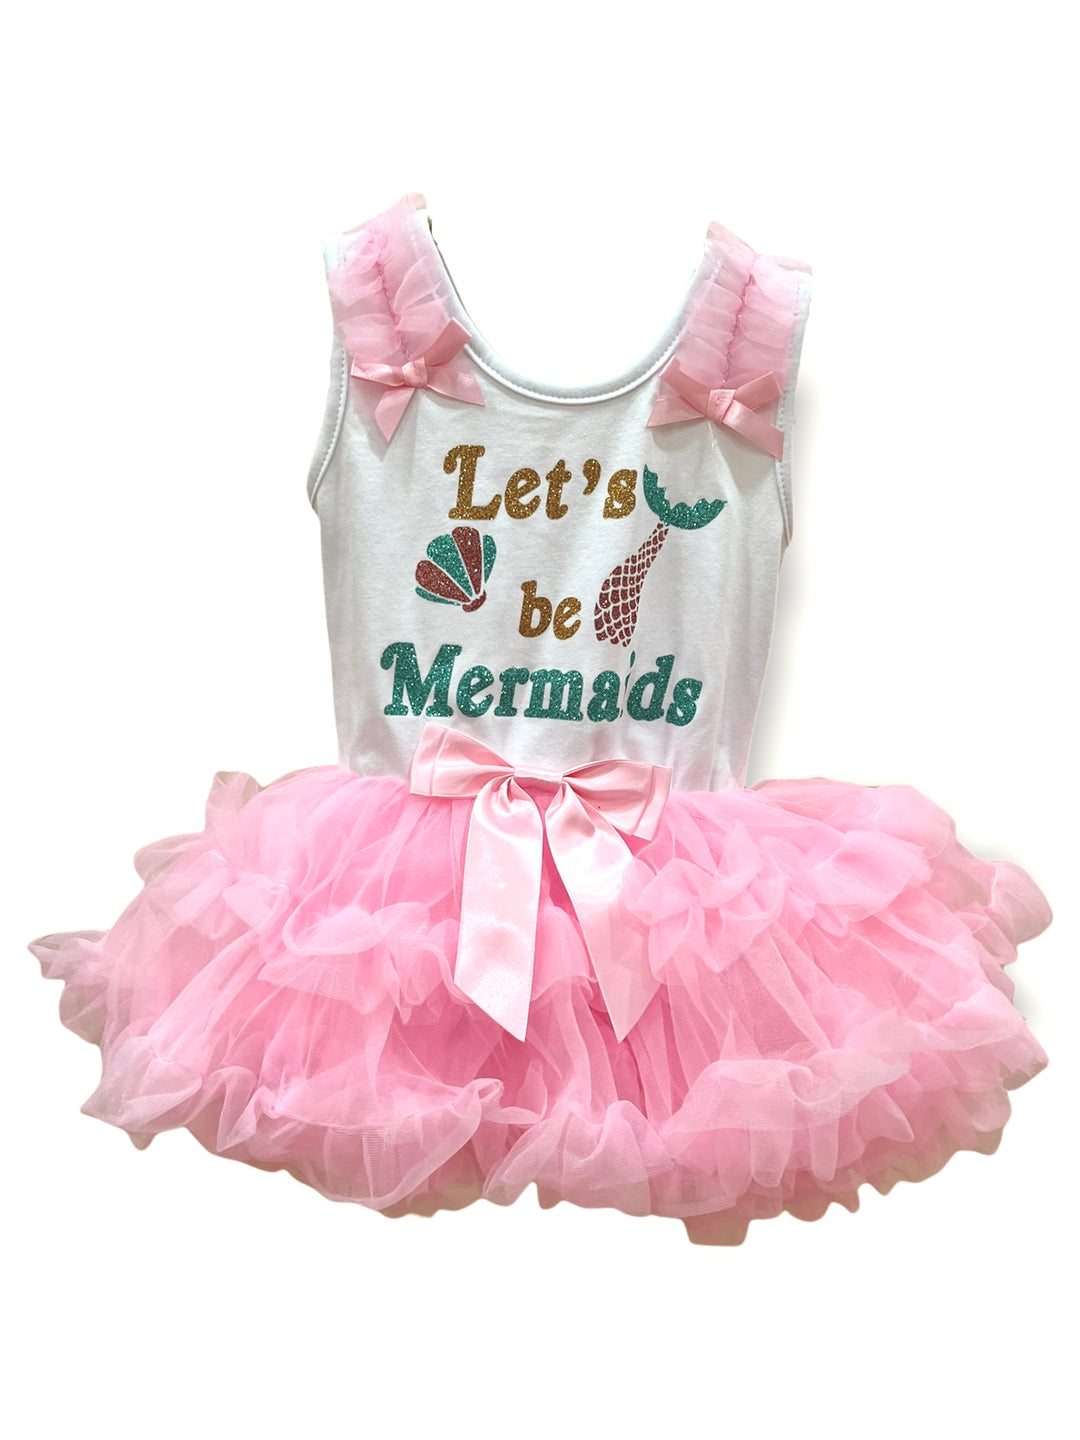 LET'S BE MERMAIDS RUFFLE DRESS - Kingfisher Road - Online Boutique